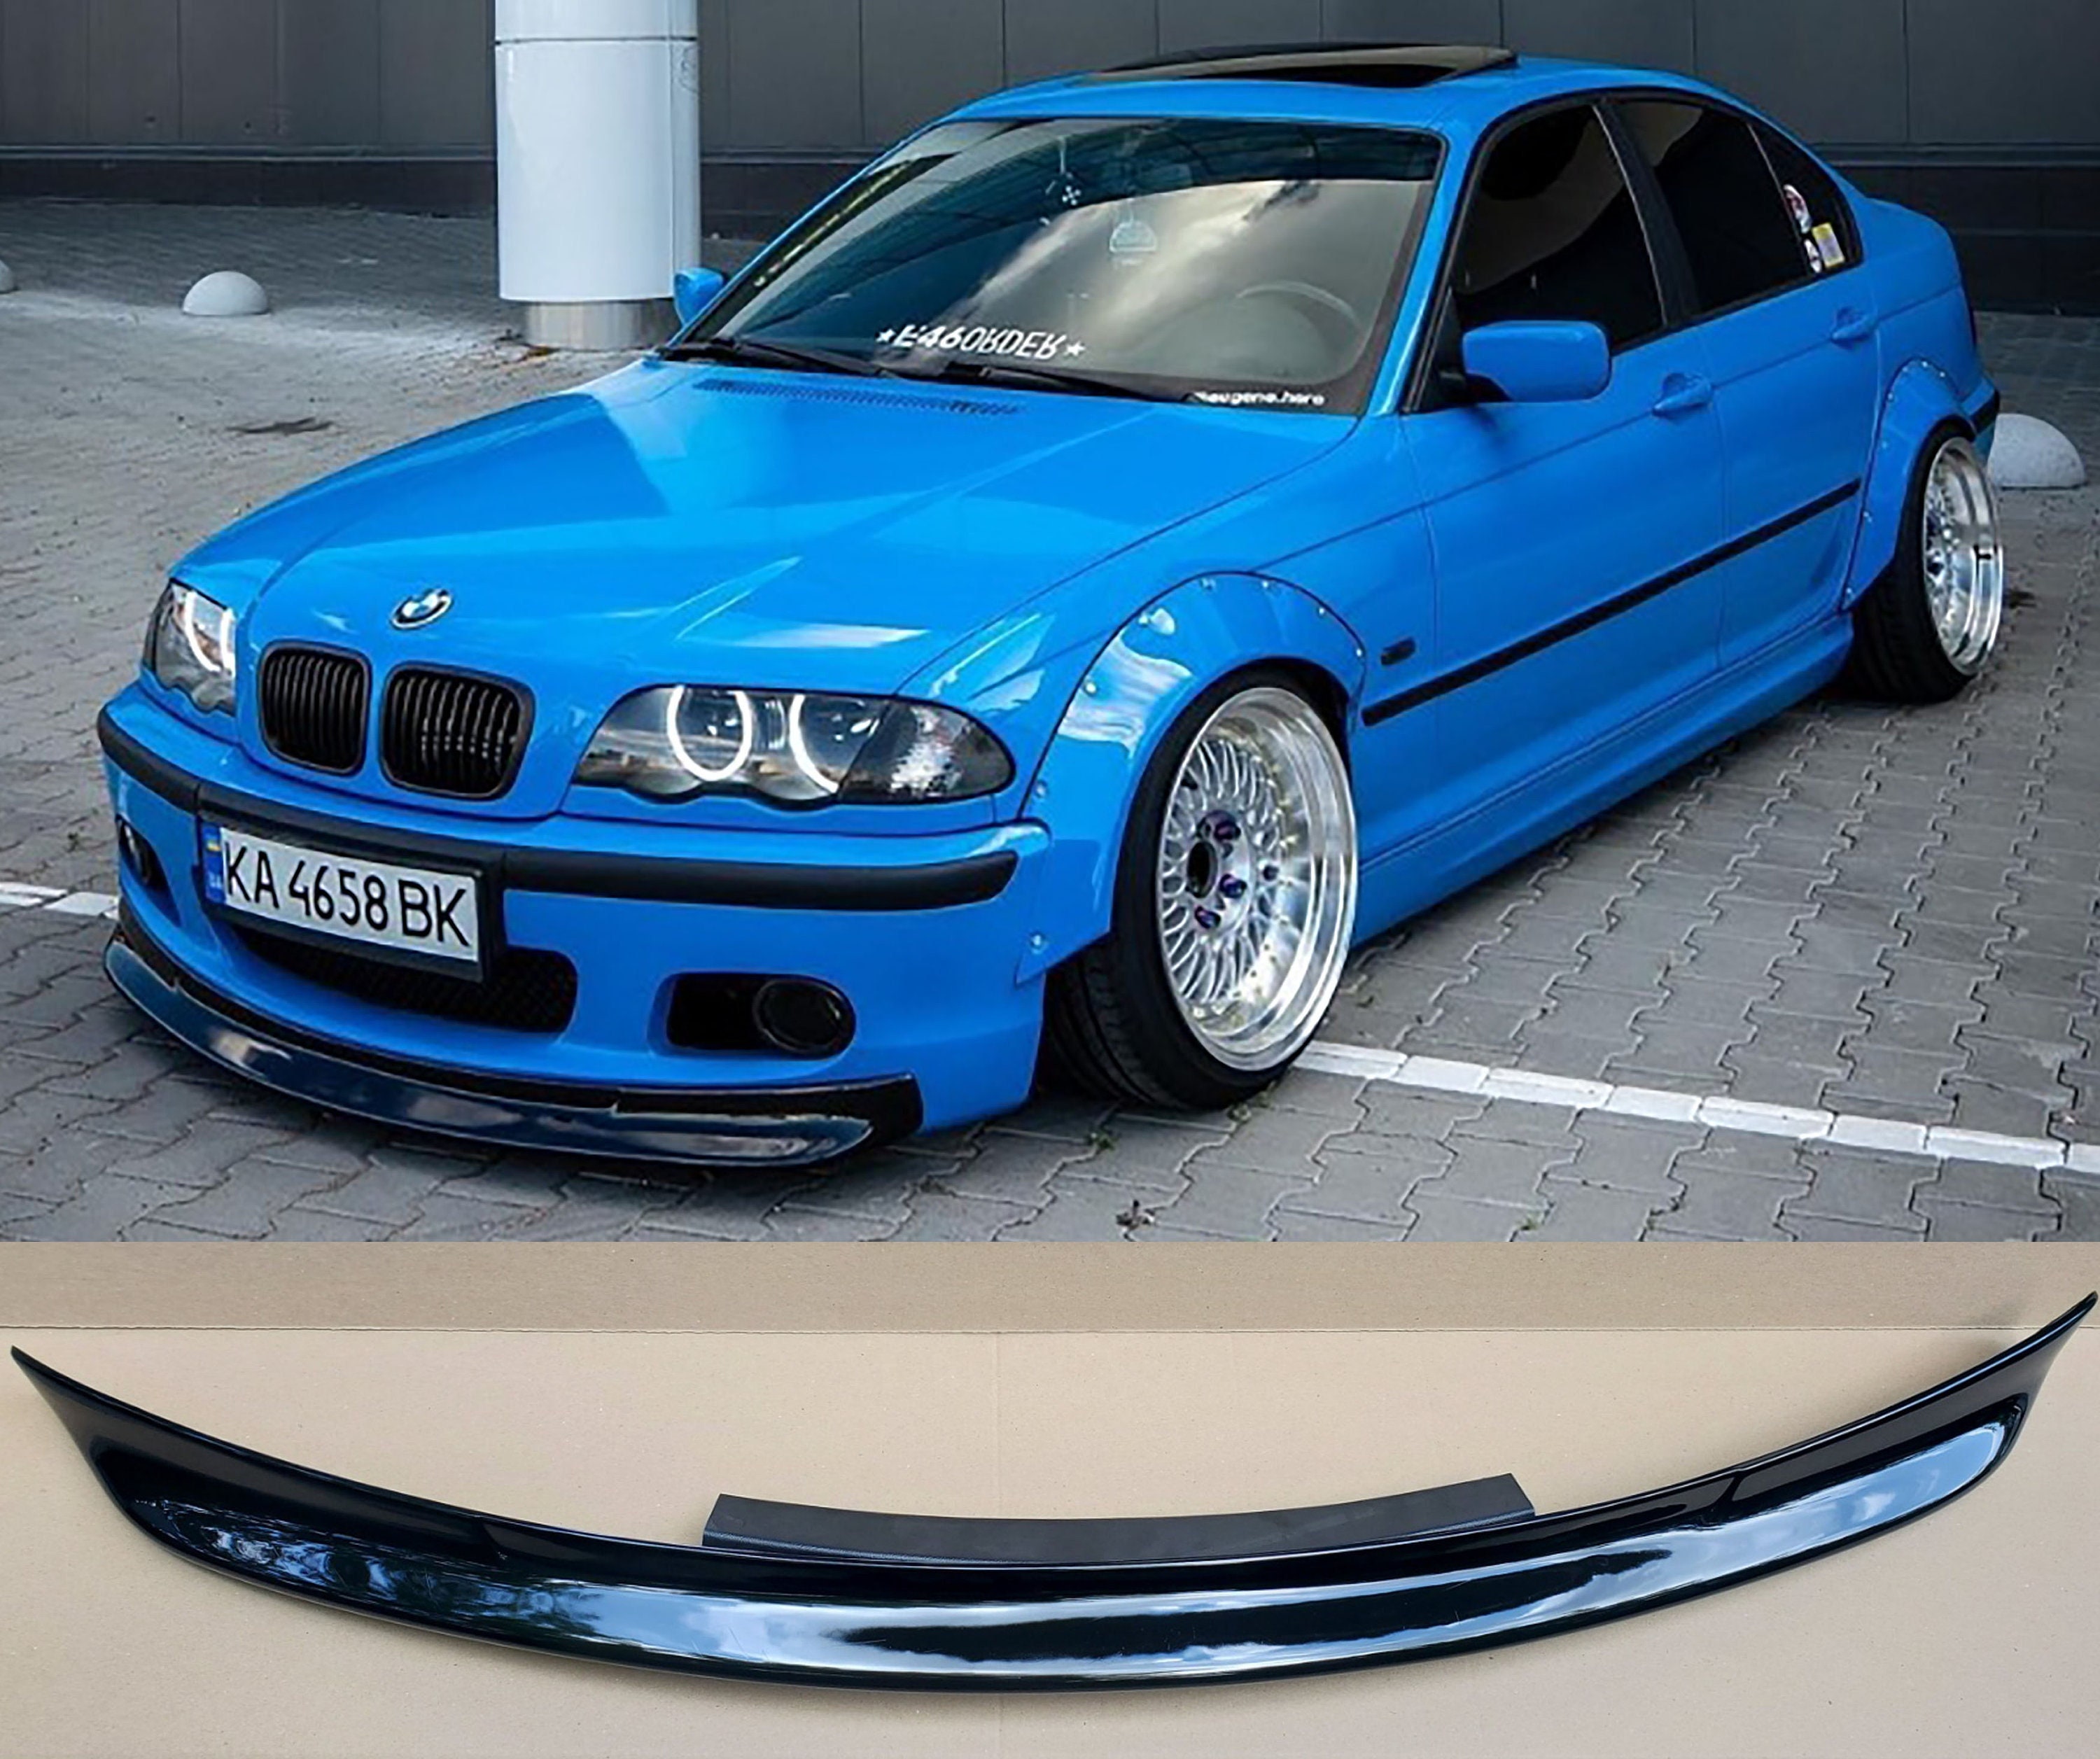 Buy Bmw E46 Front Bumper Online In India -  India